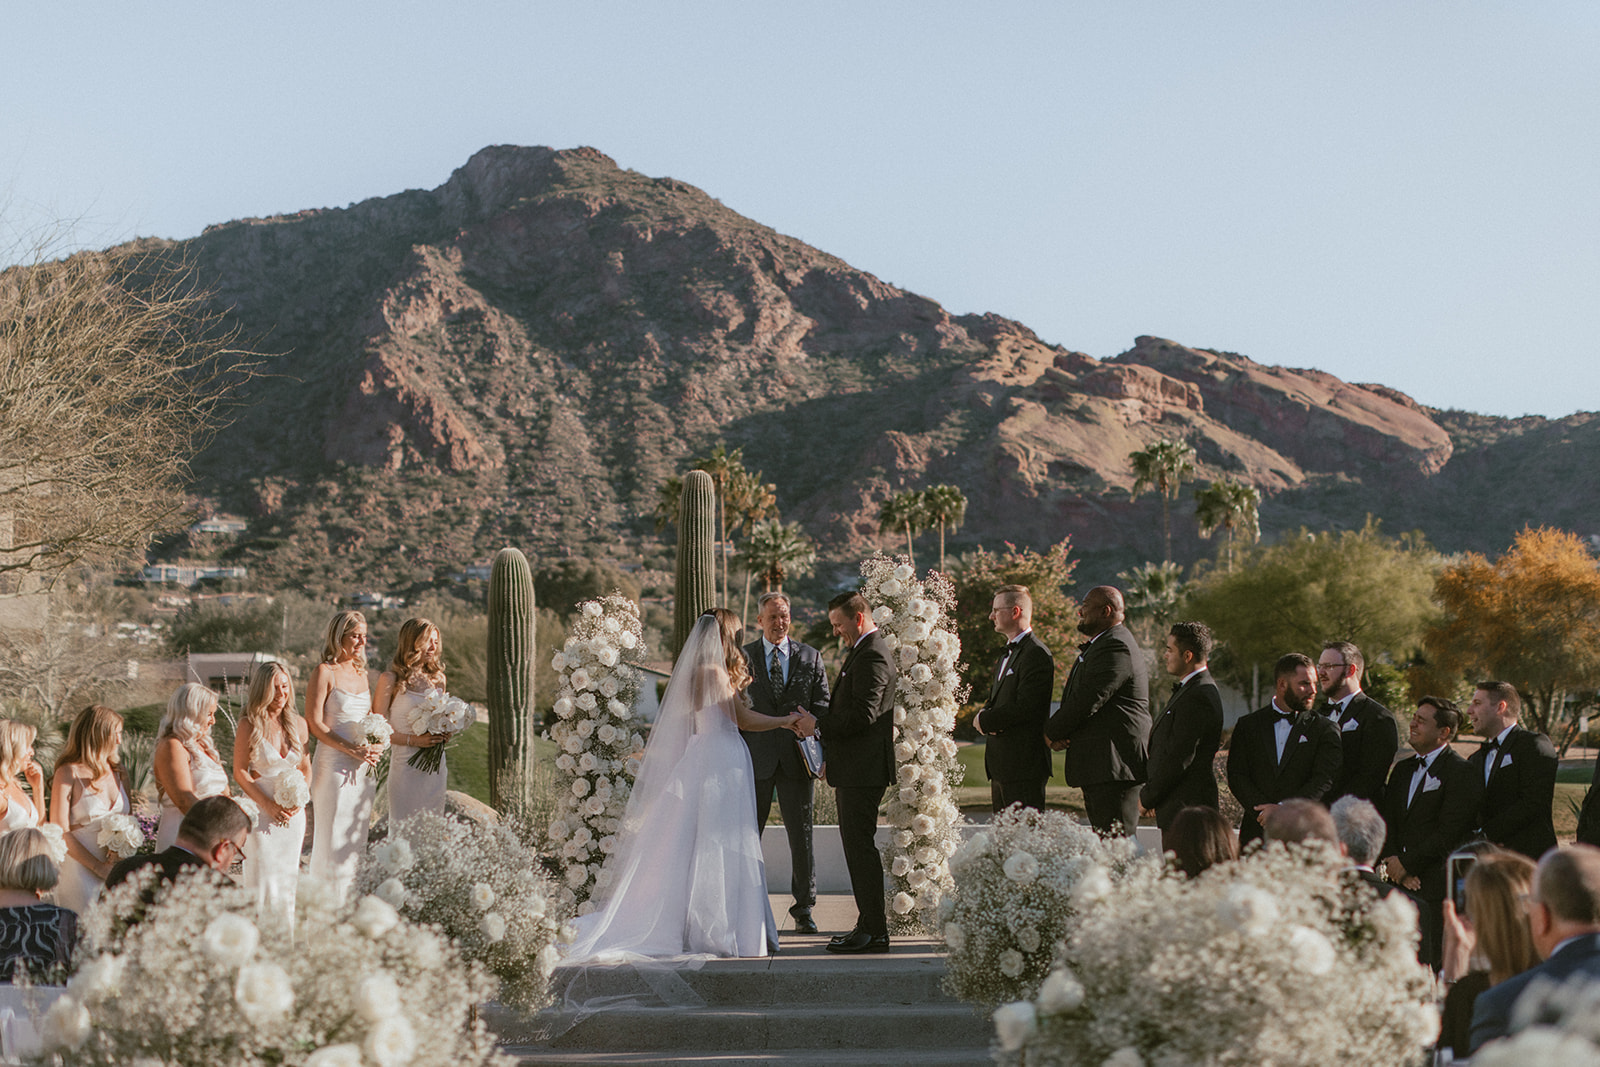 Bride and groom standing in ceremony altar space at Mountain Shadows with Camelback Mountain in background, bridesmaids and groomsmen on either side and officiant behind them.